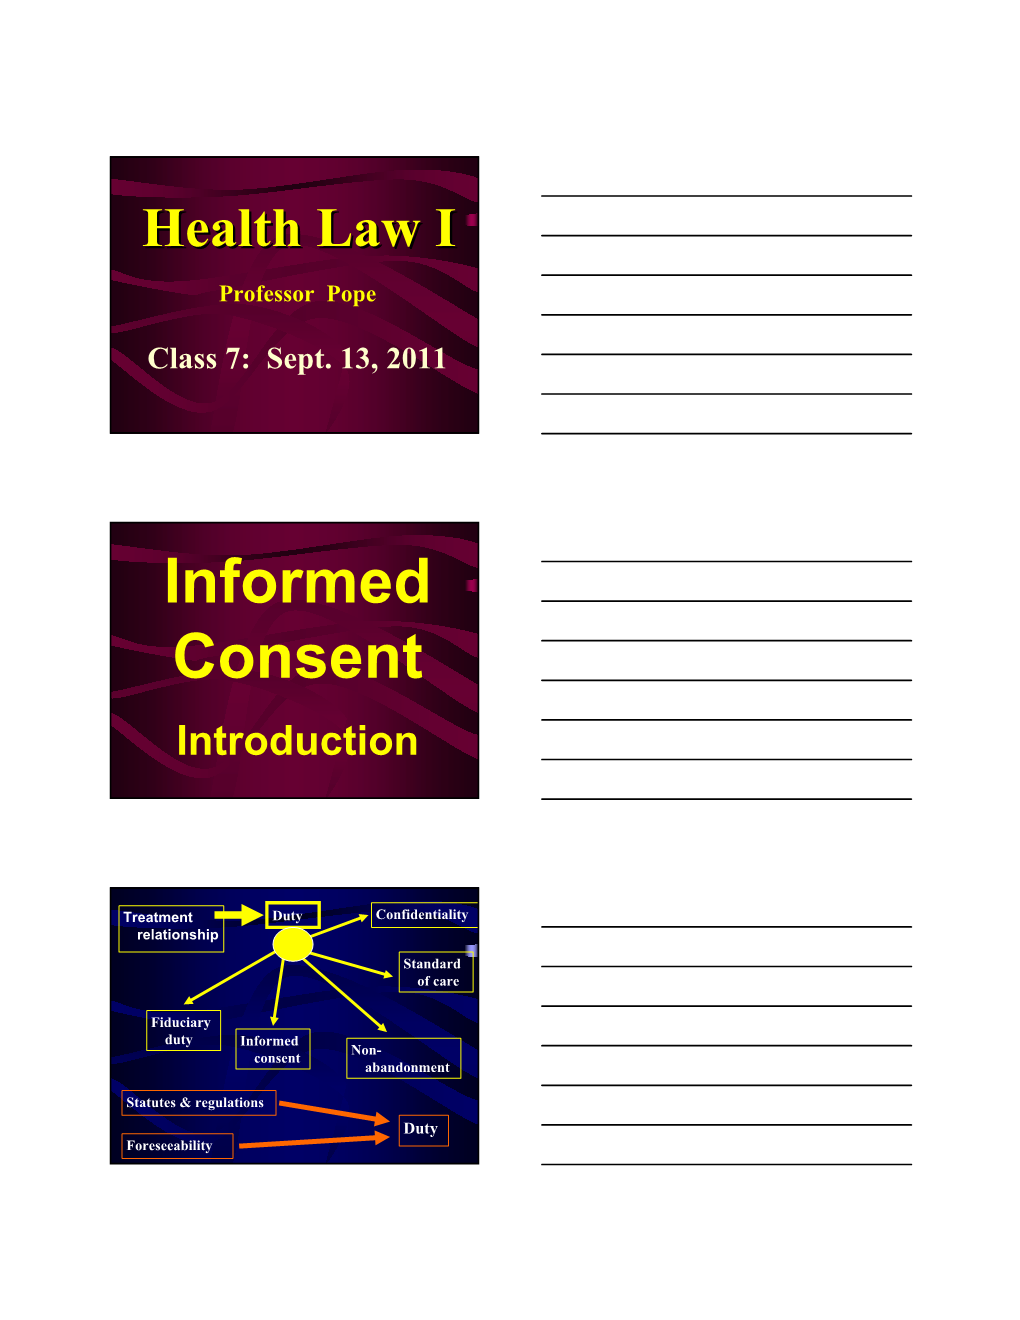 Informed Consent Introduction